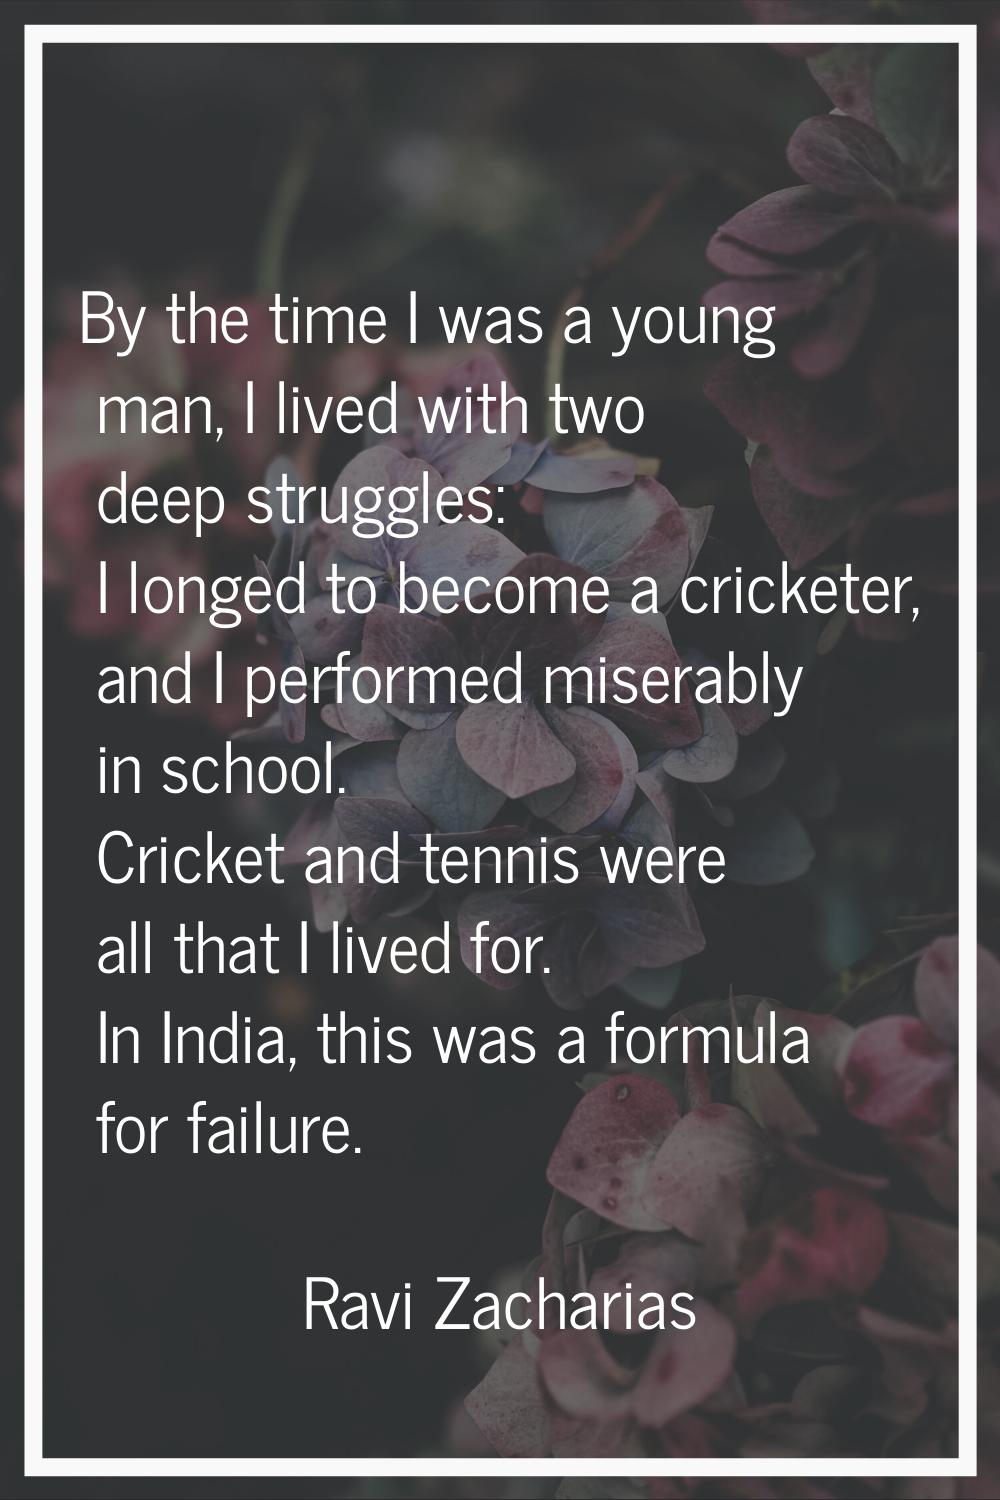 By the time I was a young man, I lived with two deep struggles: I longed to become a cricketer, and